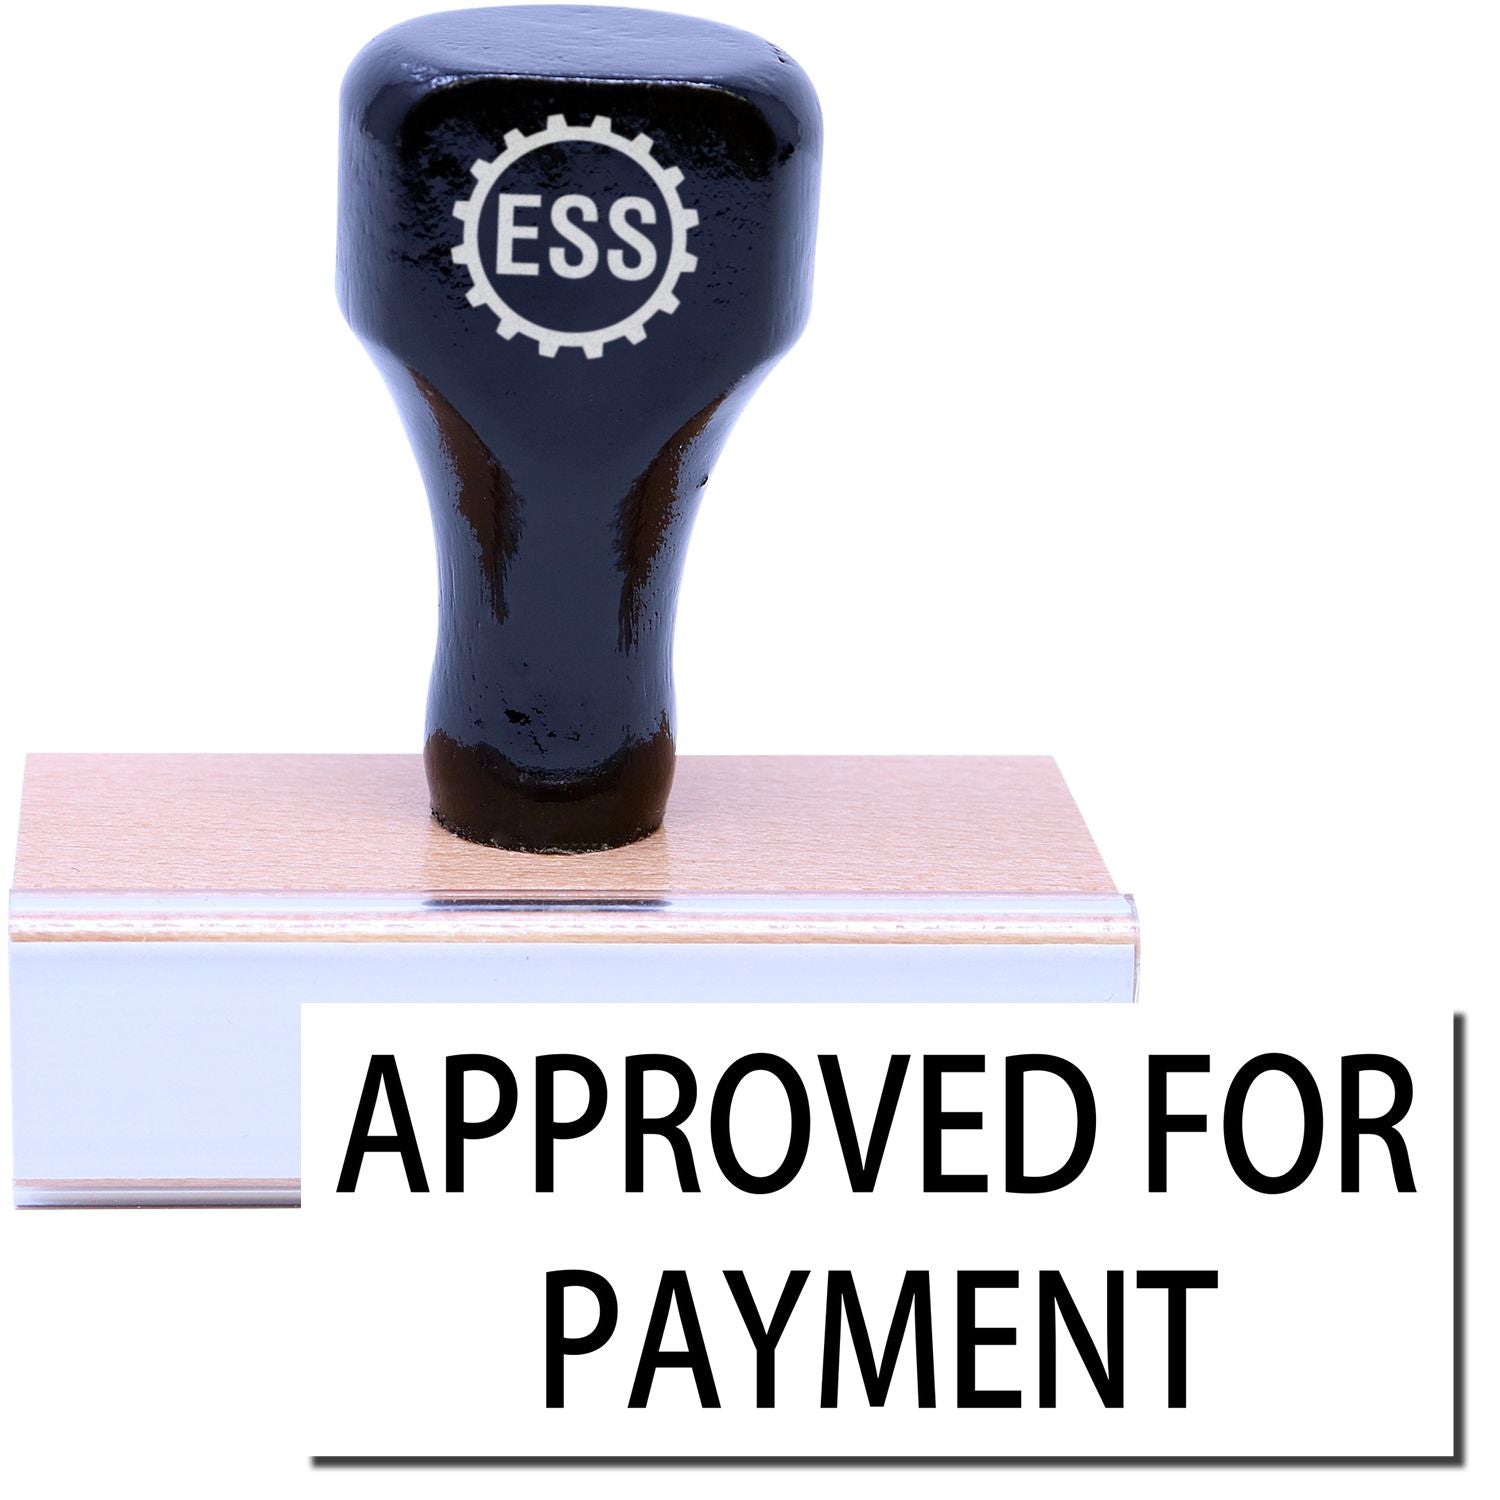 A stock office rubber stamp with a stamped image showing how the text "APPROVED FOR PAYMENT" is displayed after stamping.